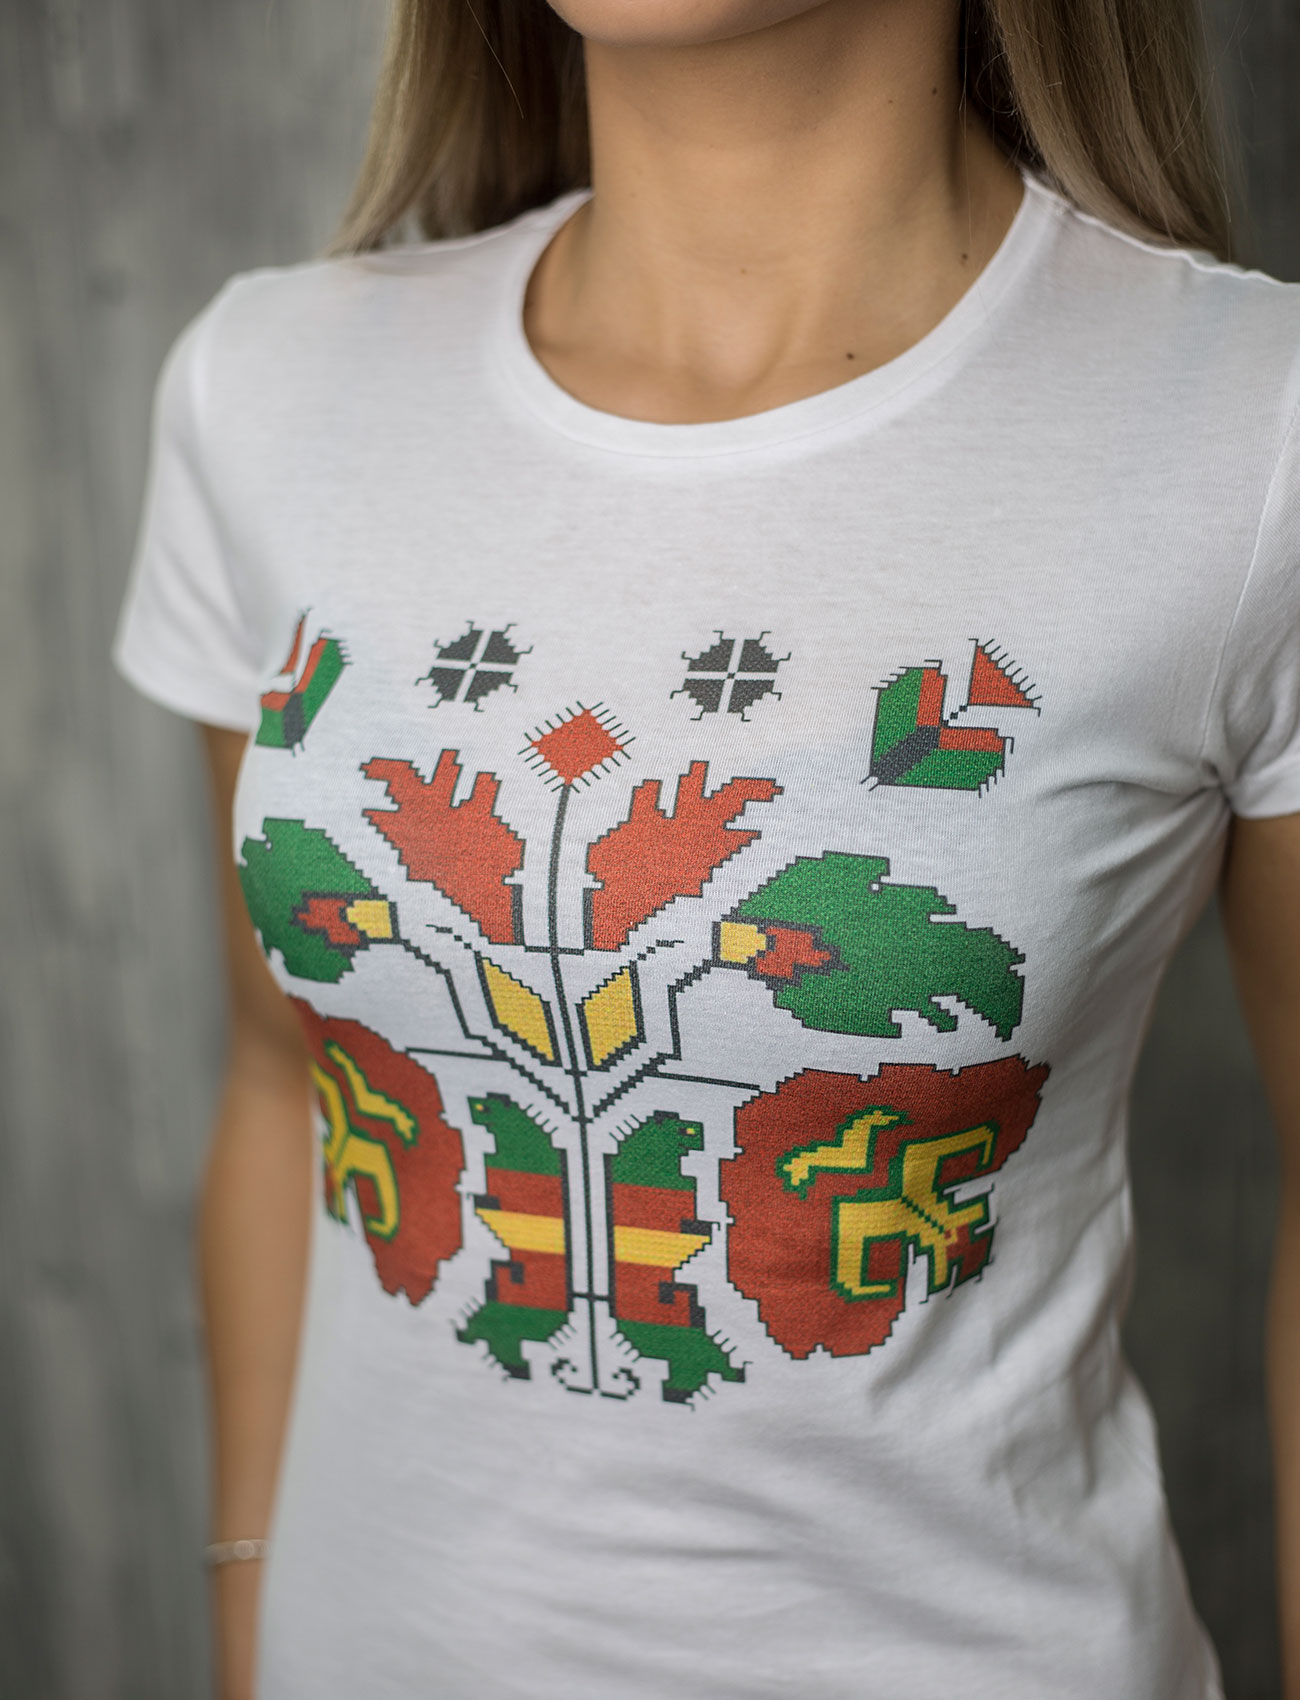 Tree Of Life Embroidery Pattern Womens T Shirt With Printed Embroidery Pattern The Tree Of Life